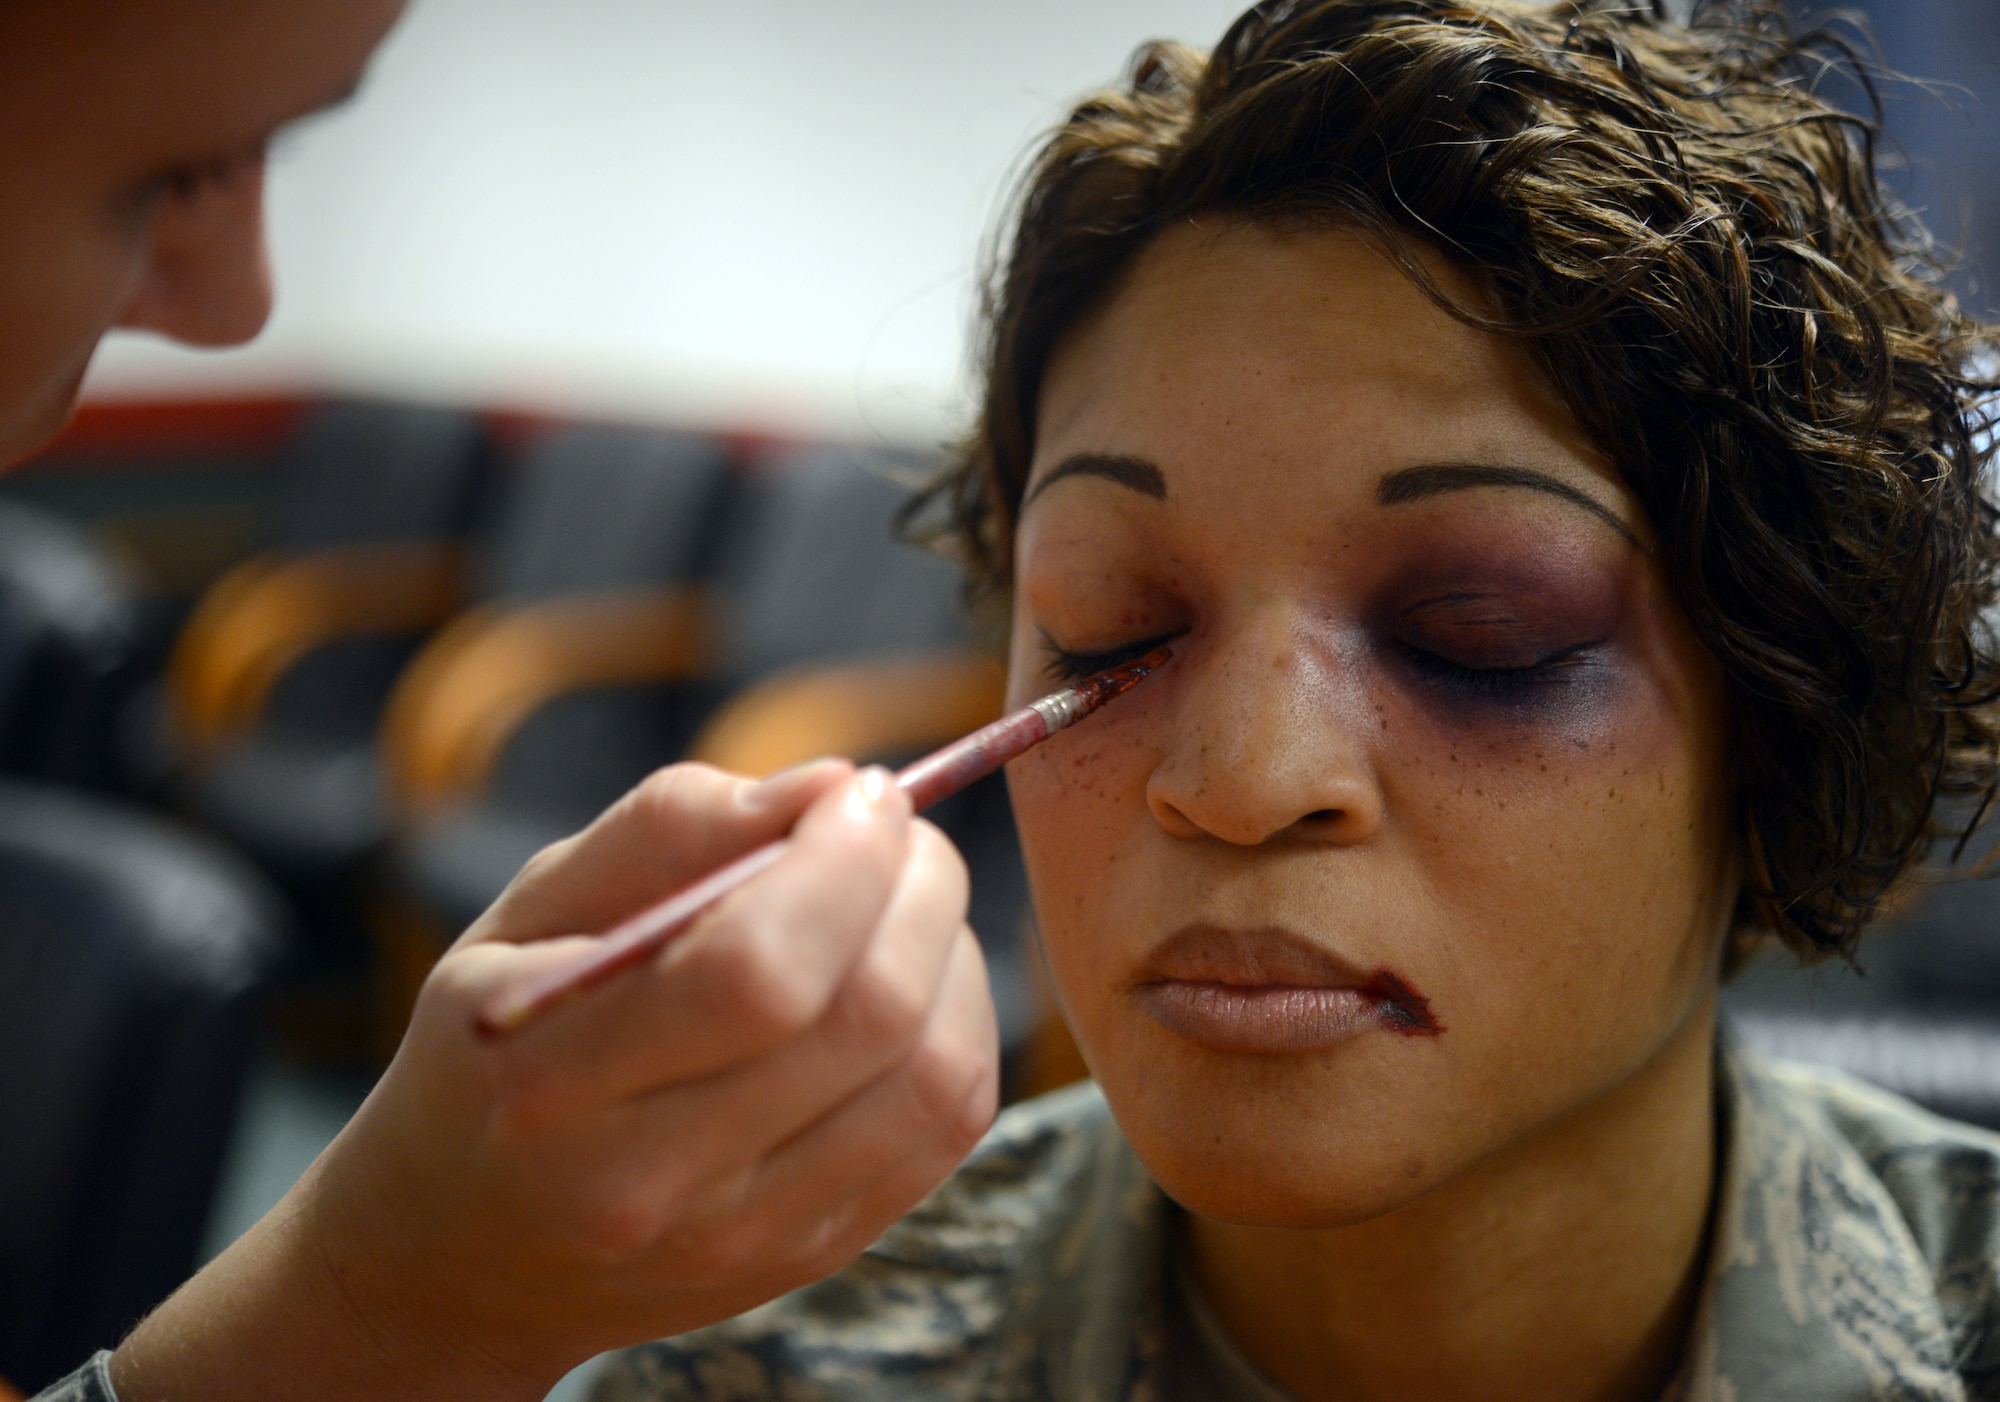 Senior Airman Liberty Provo, 86th Dental Squadron dental laboratory technician, applies makeup to Tech. Sgt. Erica Carr, 86th Communications Squadron Kaiserslautern Military Community frequency manager, to simulate domestic violence injuries at Ramstein Air Base, Germany, Oct. 2, 2014. October is Domestic Violence Awareness Month, and this year’s theme is “Thanks for Asking.” Participants volunteered to don the fake injuries to raise awareness for domestic violence victims, who sometimes remain silent. (U.S. Air Force photo/Senior Airman Timothy Moore)